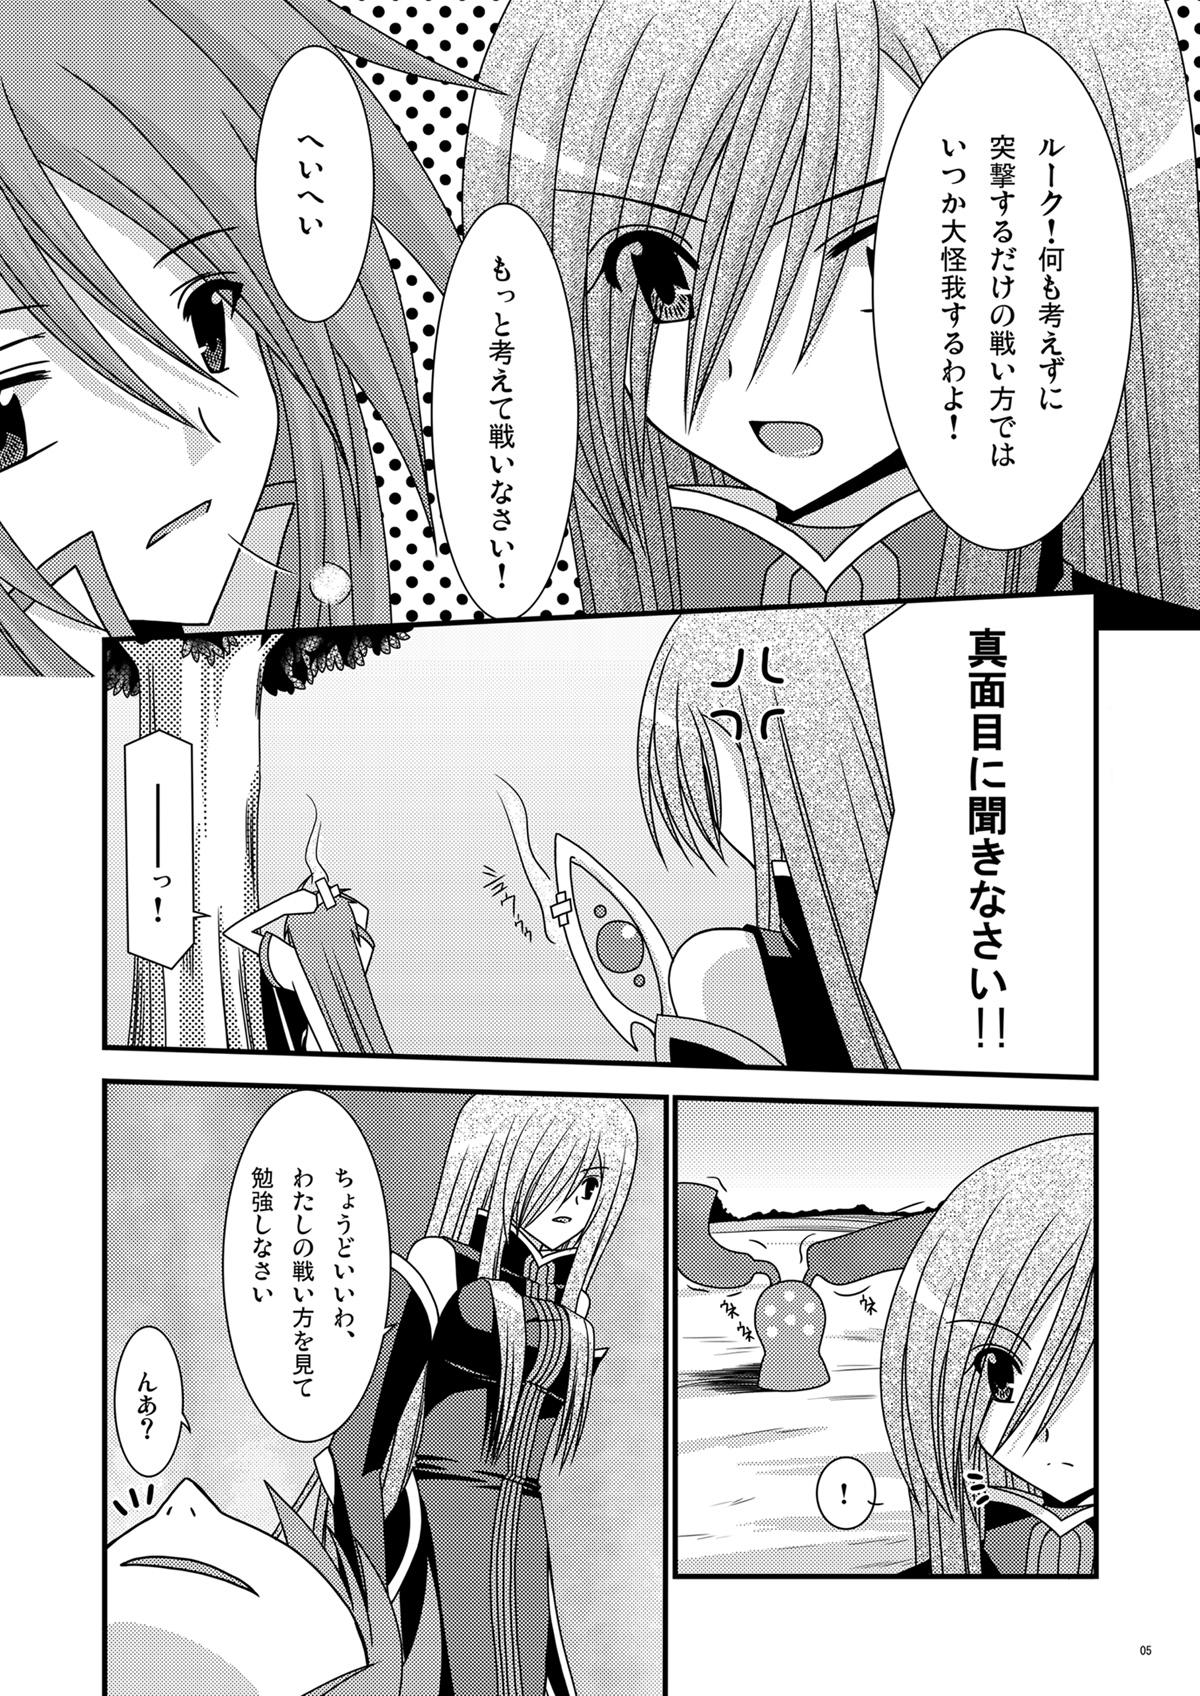 Indonesia Shokushu Kantan - Tales of the abyss Blowjob - Page 5